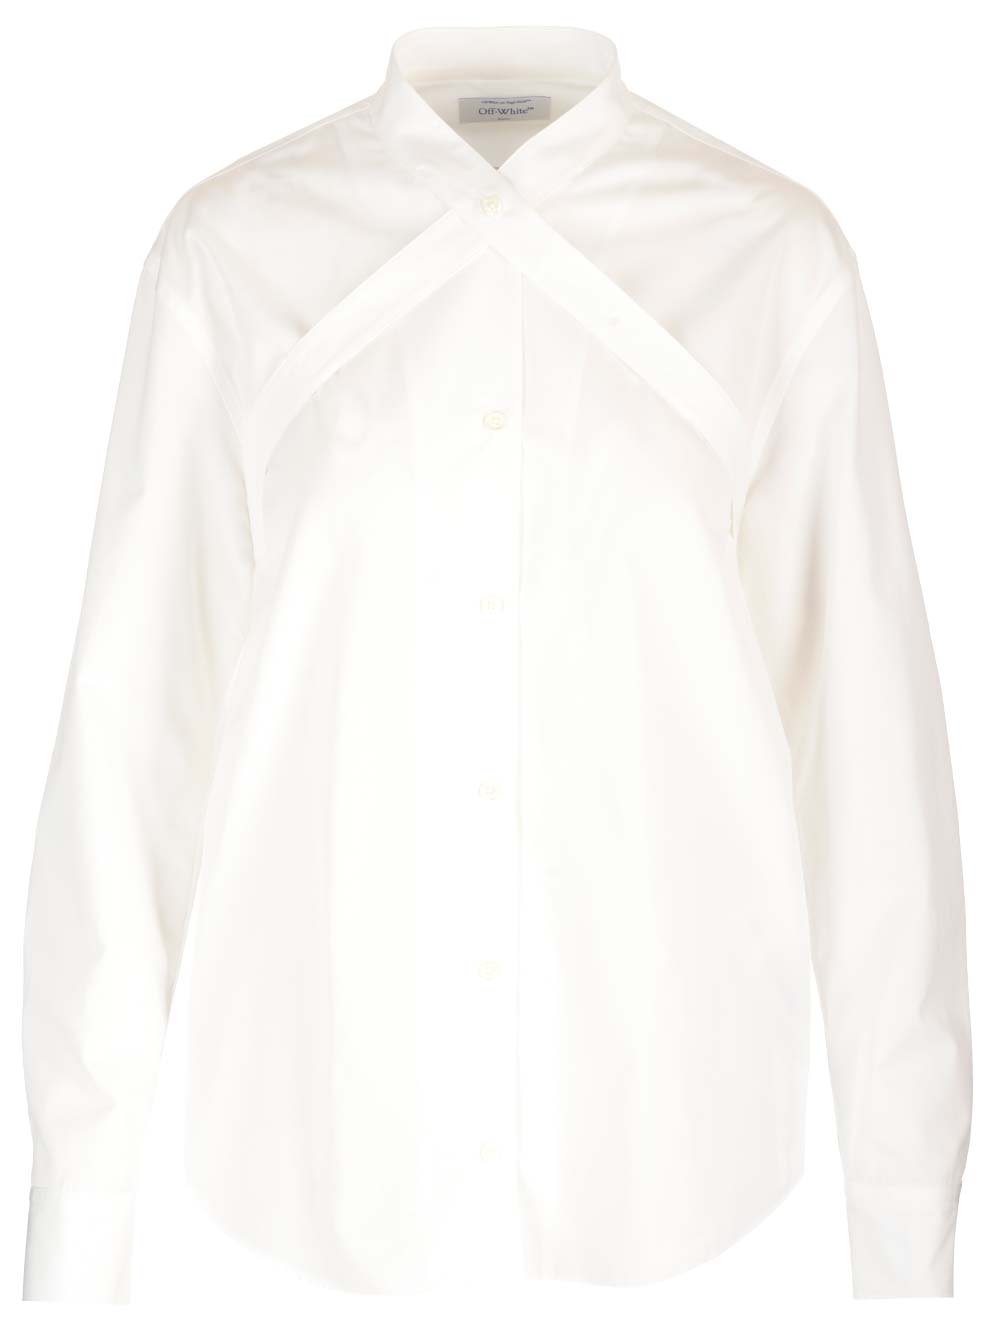 OFF-WHITE CUT- OUT POPELINE SHIRT